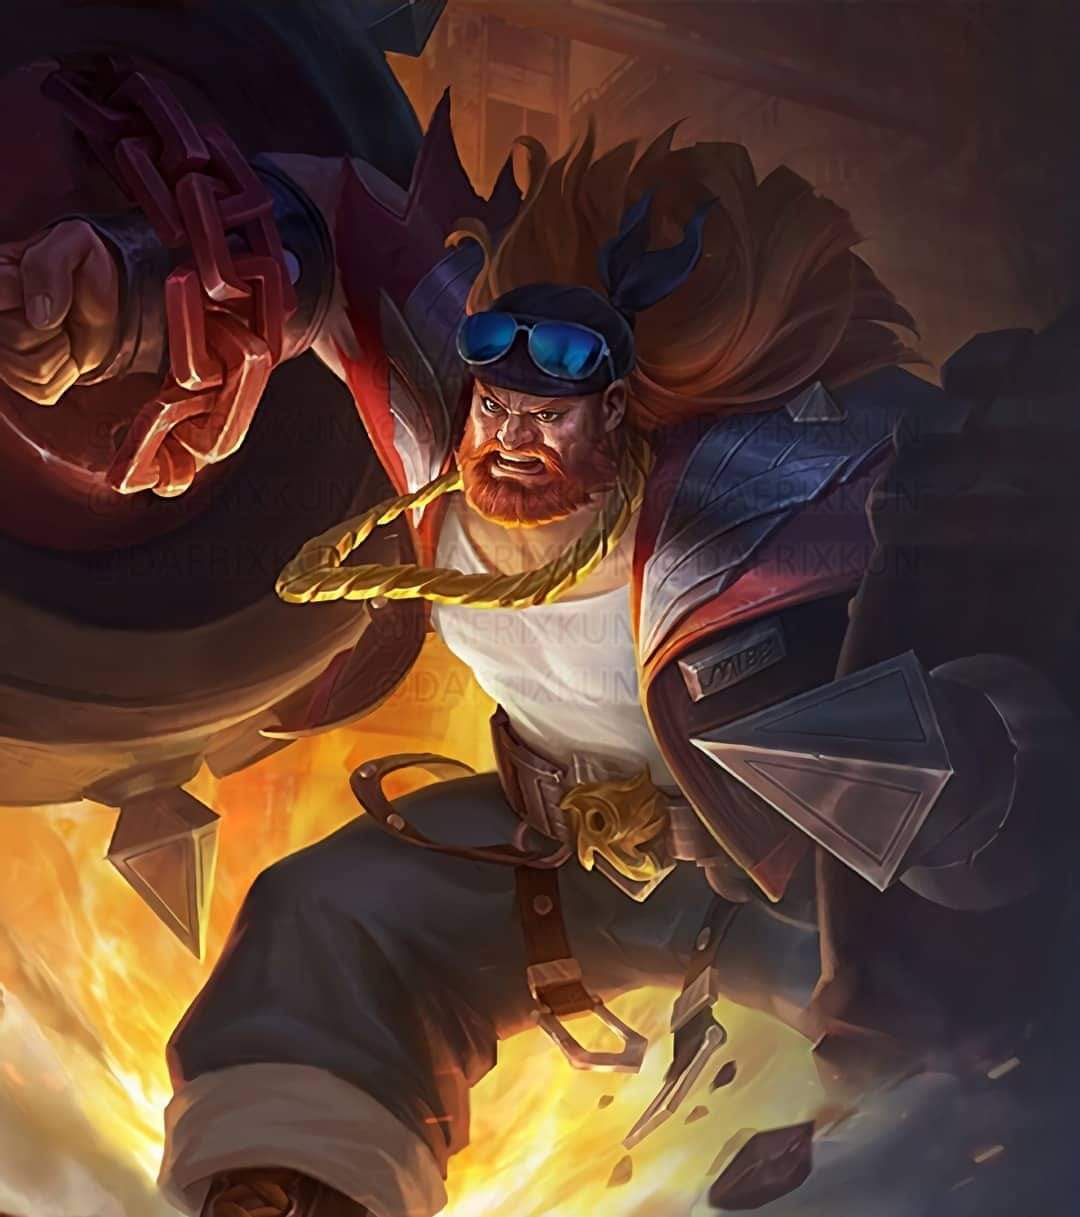 the latest skin for Baxia in Mobile Legends